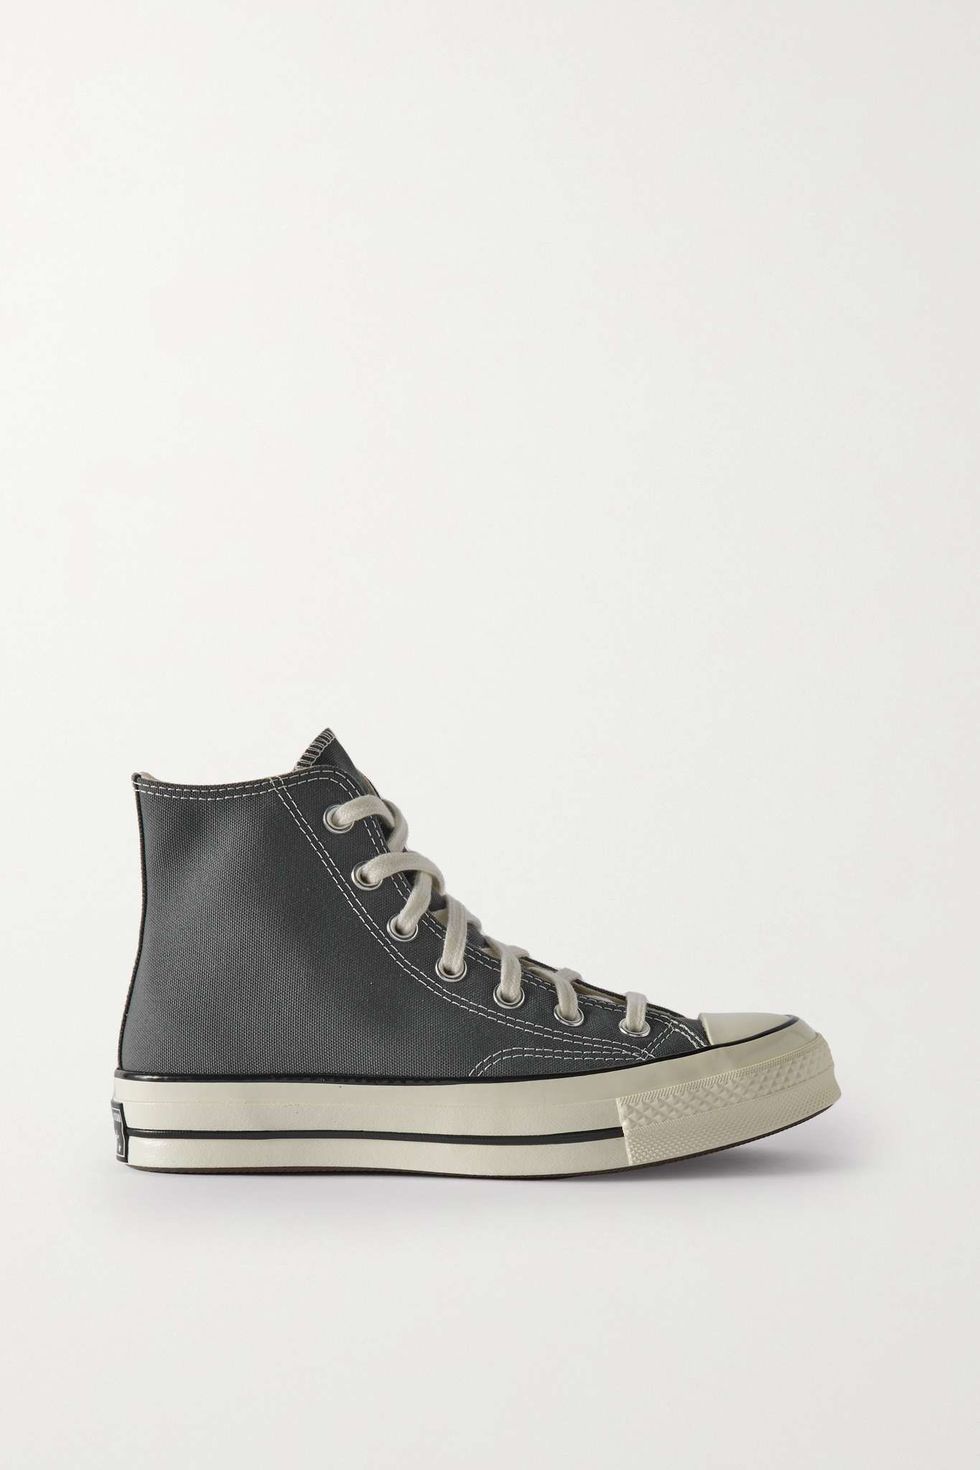 Chuck 70 vintage canvas high-top sneakers